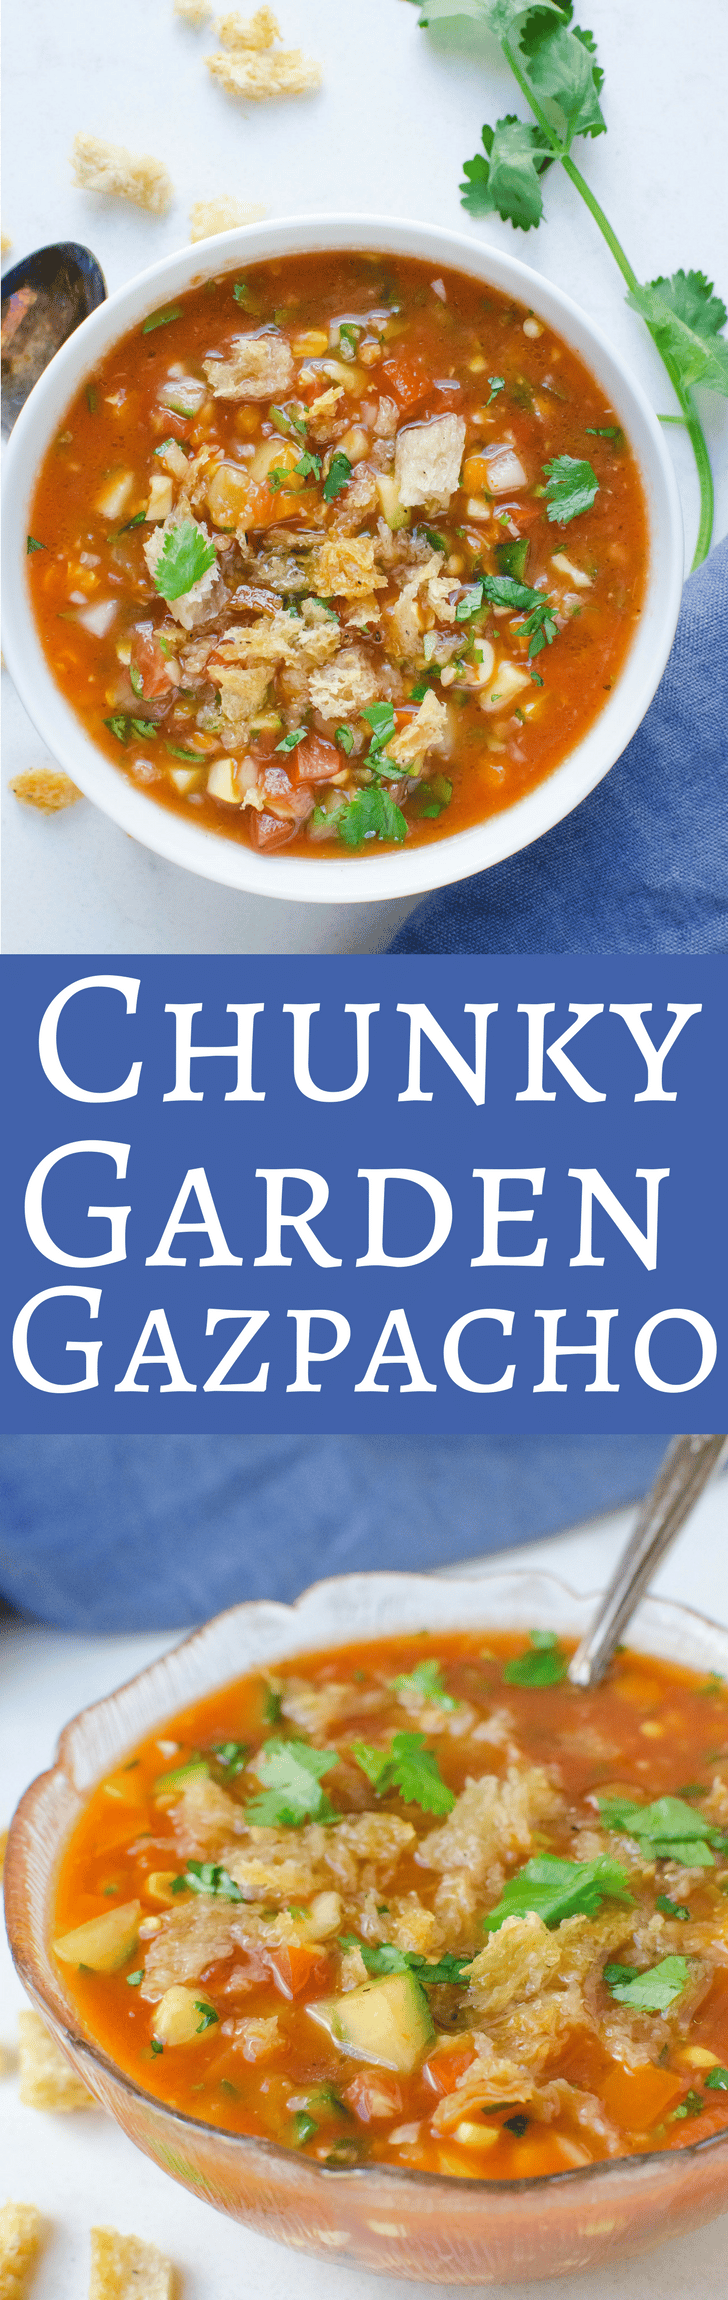 Loaded with veggies, this easy gazpacho recipe is cool and refreshing! Perfect for summer!